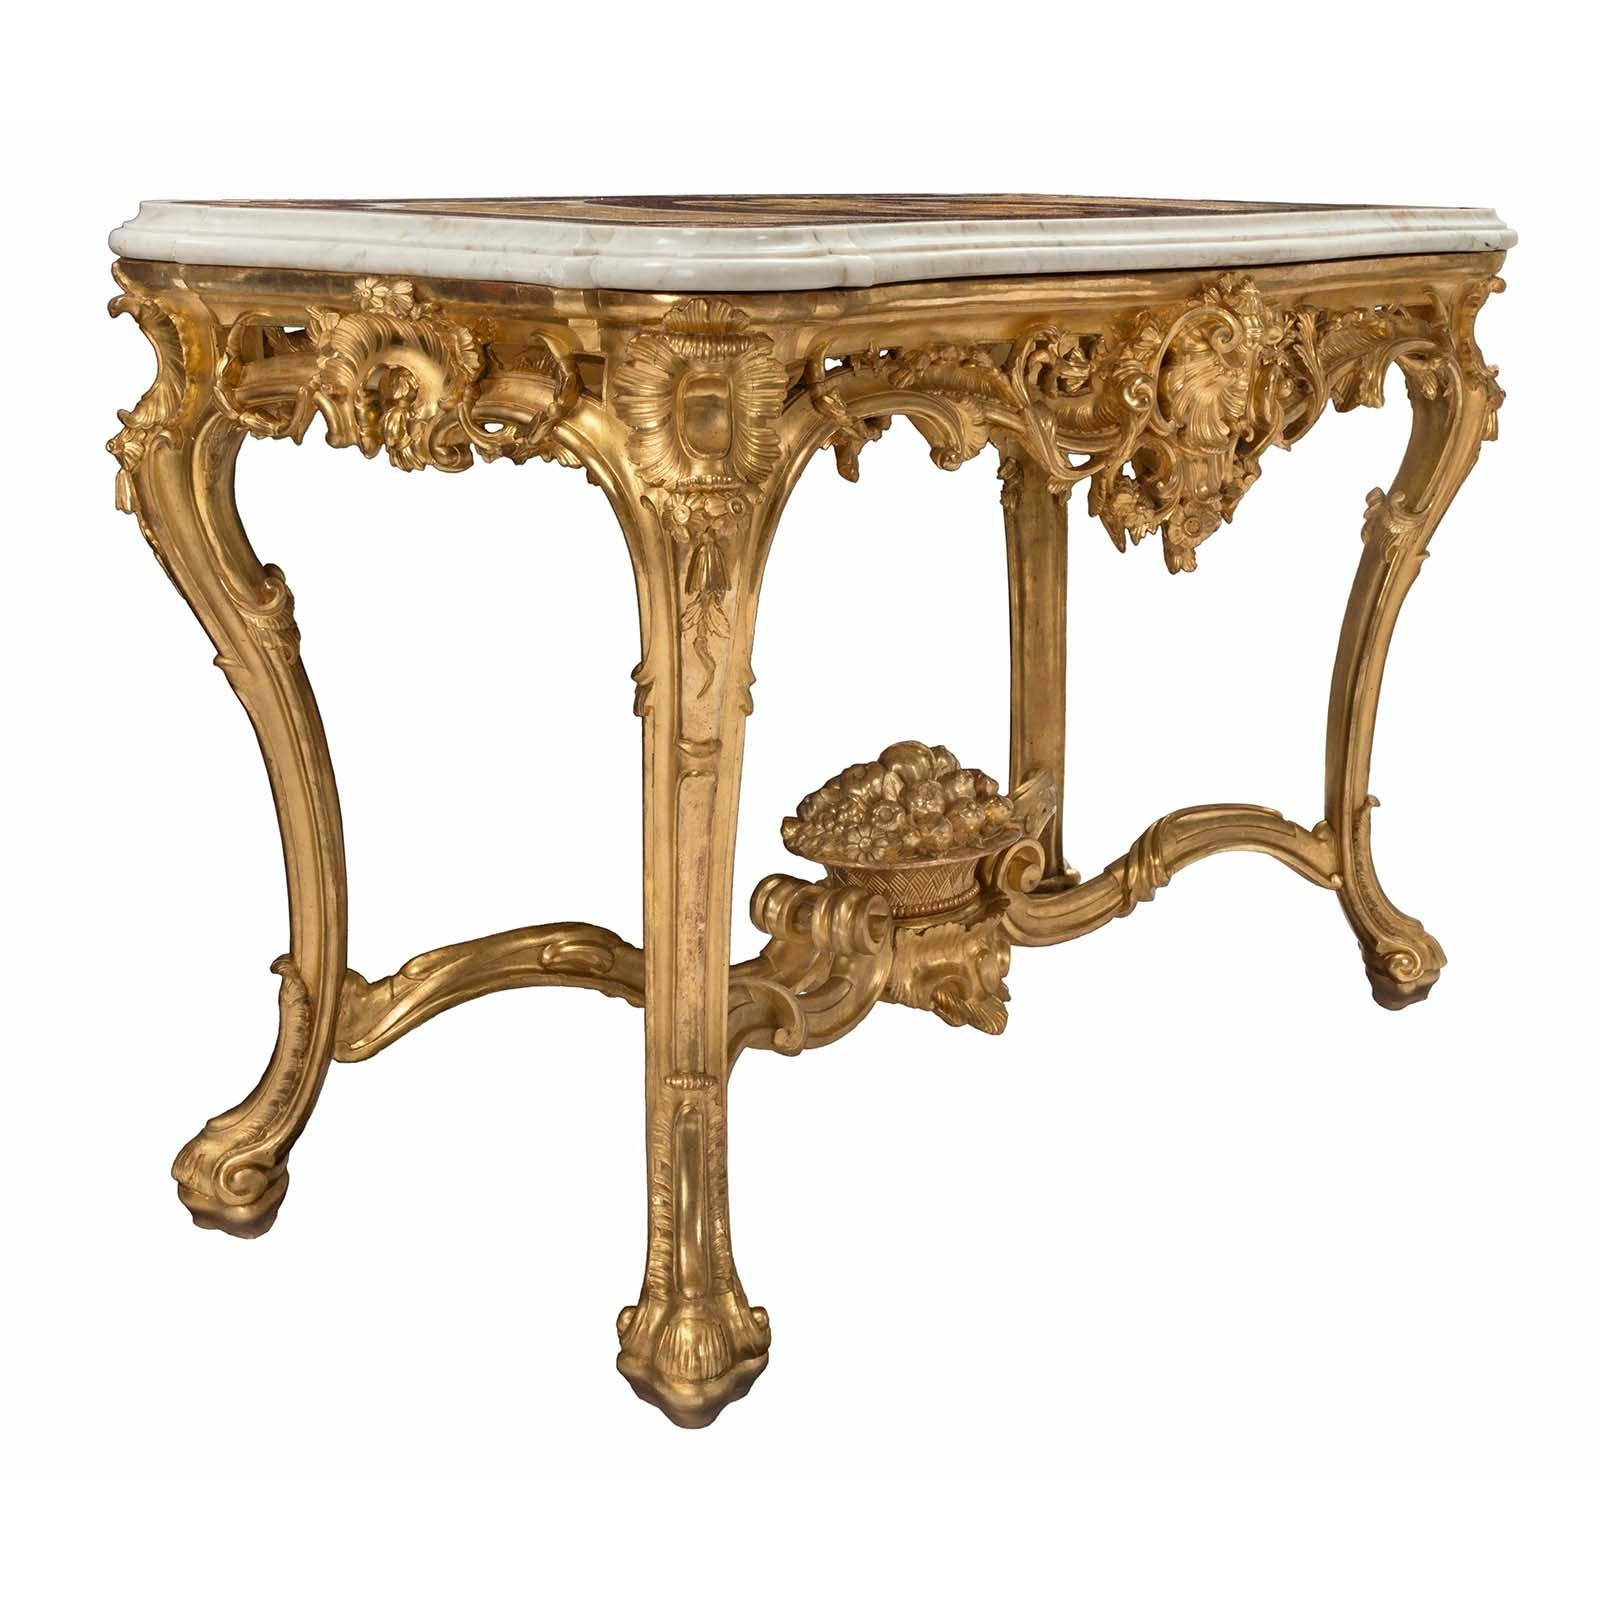 Italian Early 19th Century Louis XV Style Giltwood and Marble Center Table For Sale 2